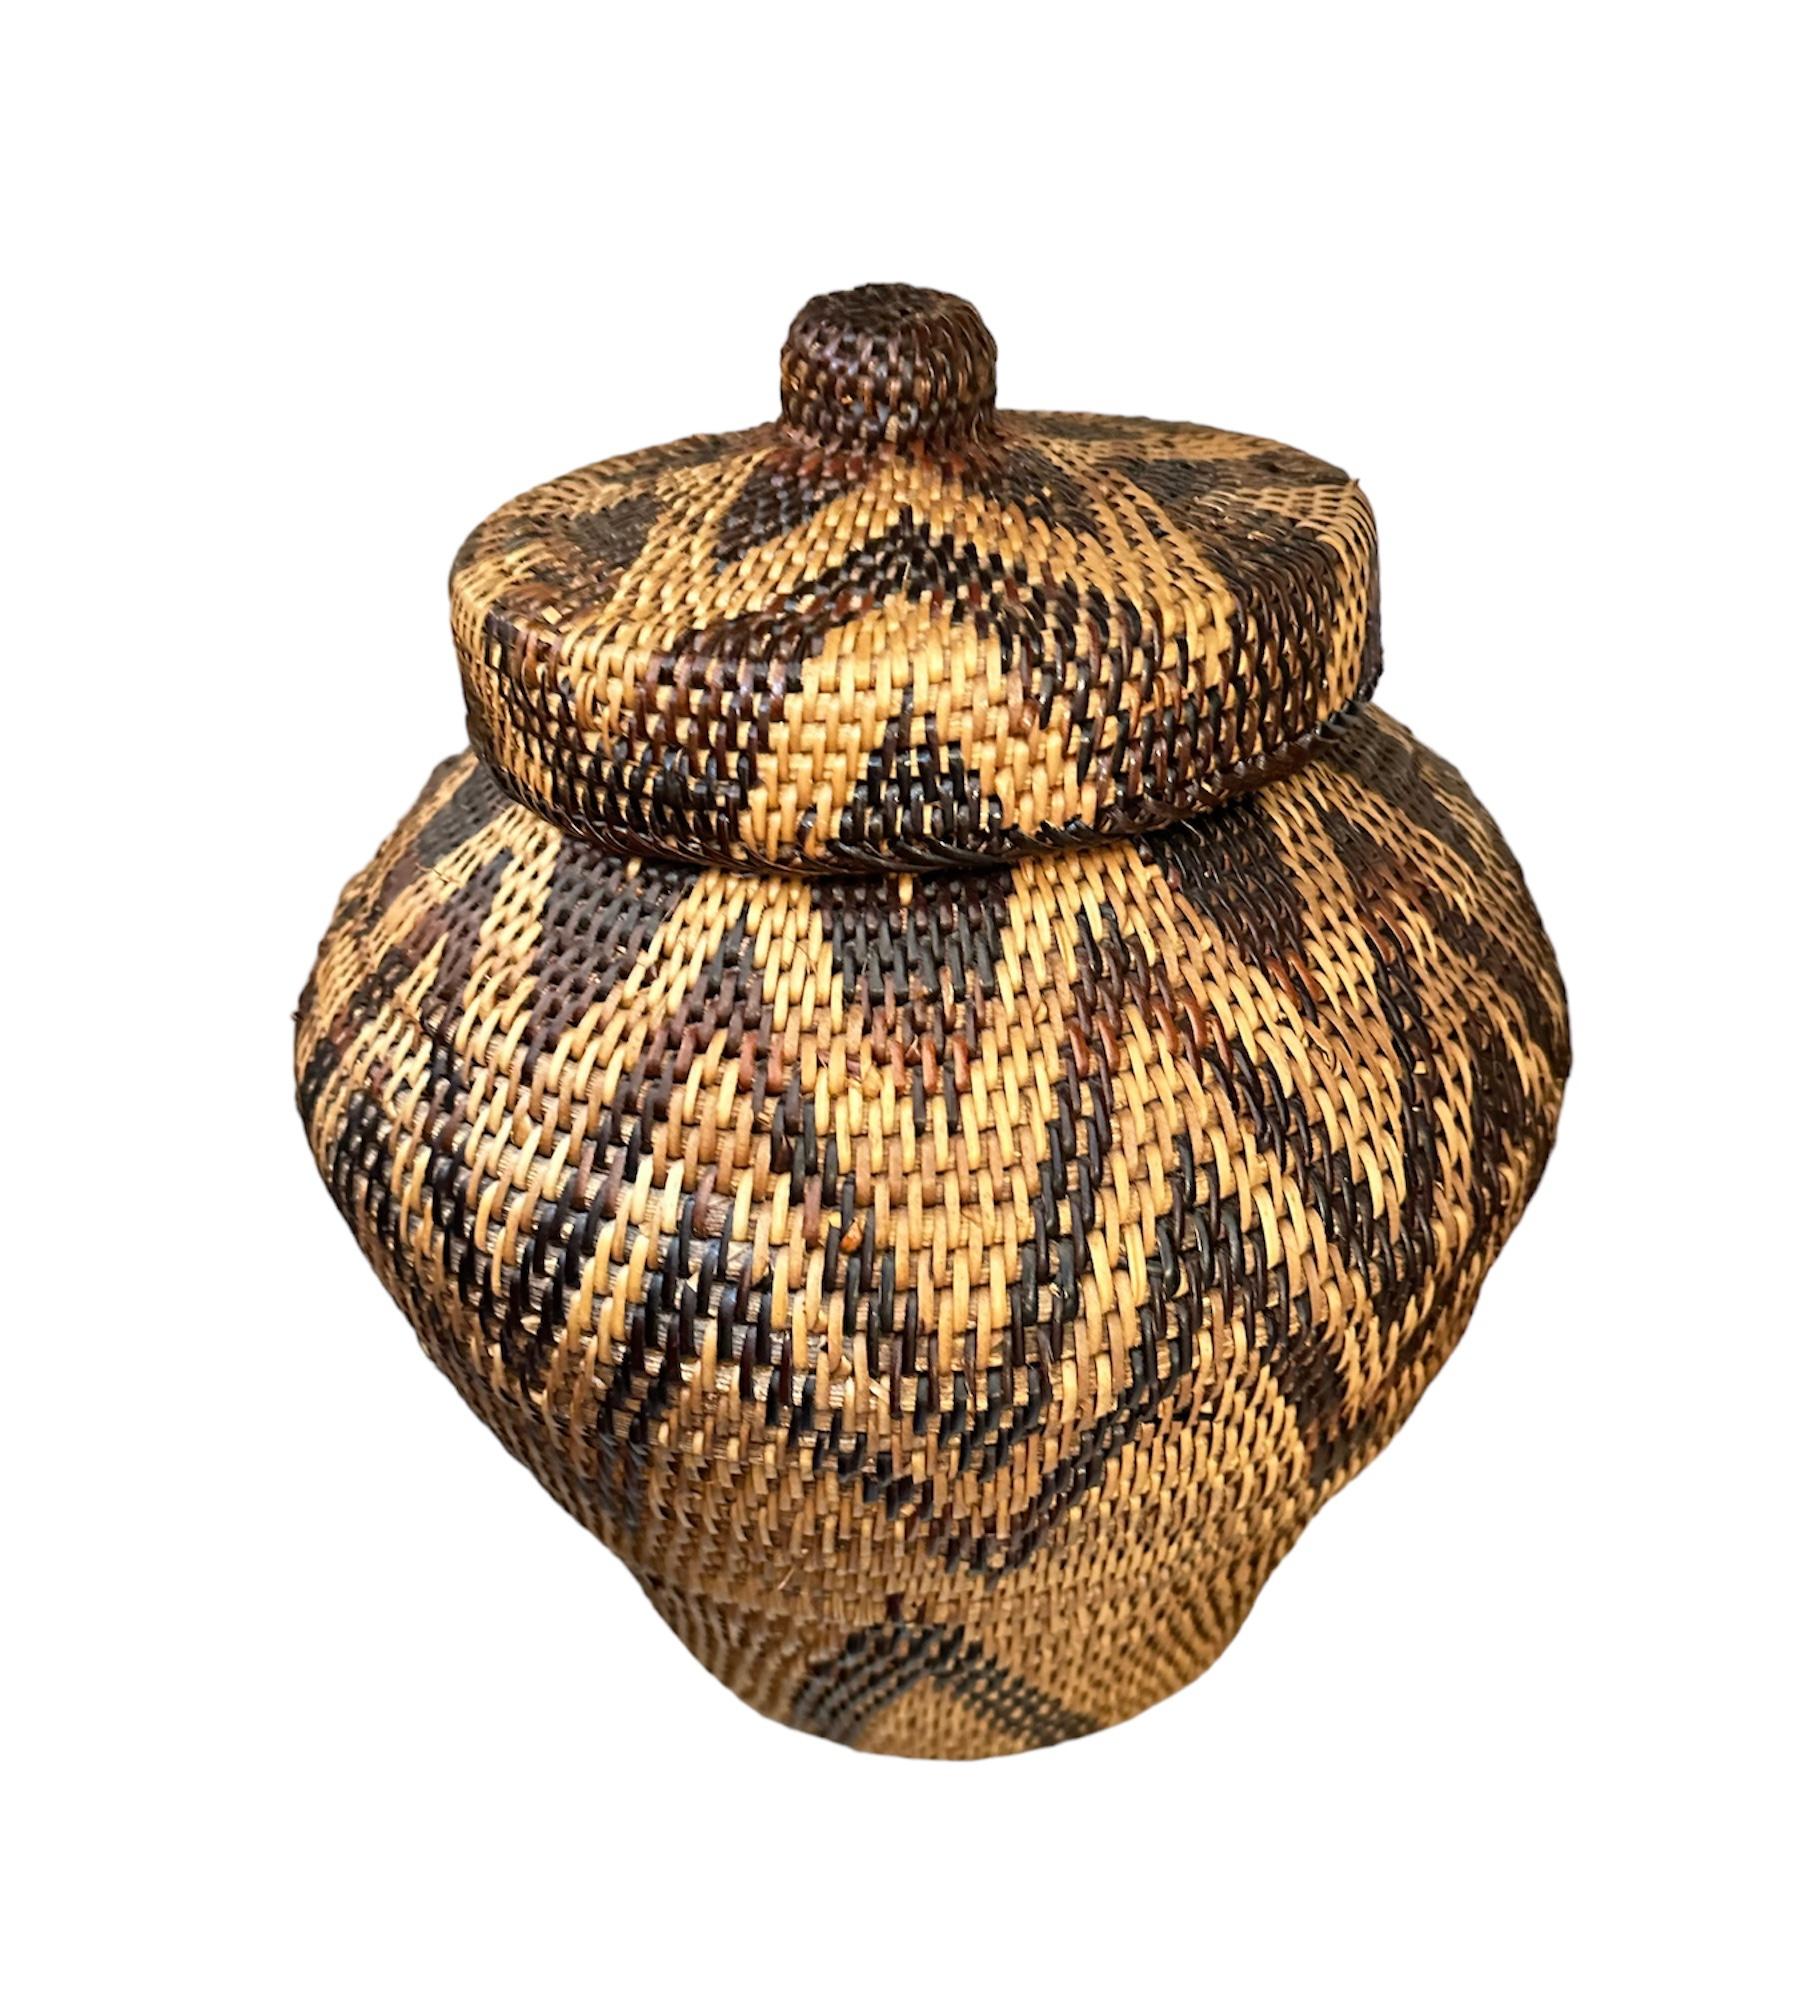 Botswanan Unique Collection of African Decorative Baskets 